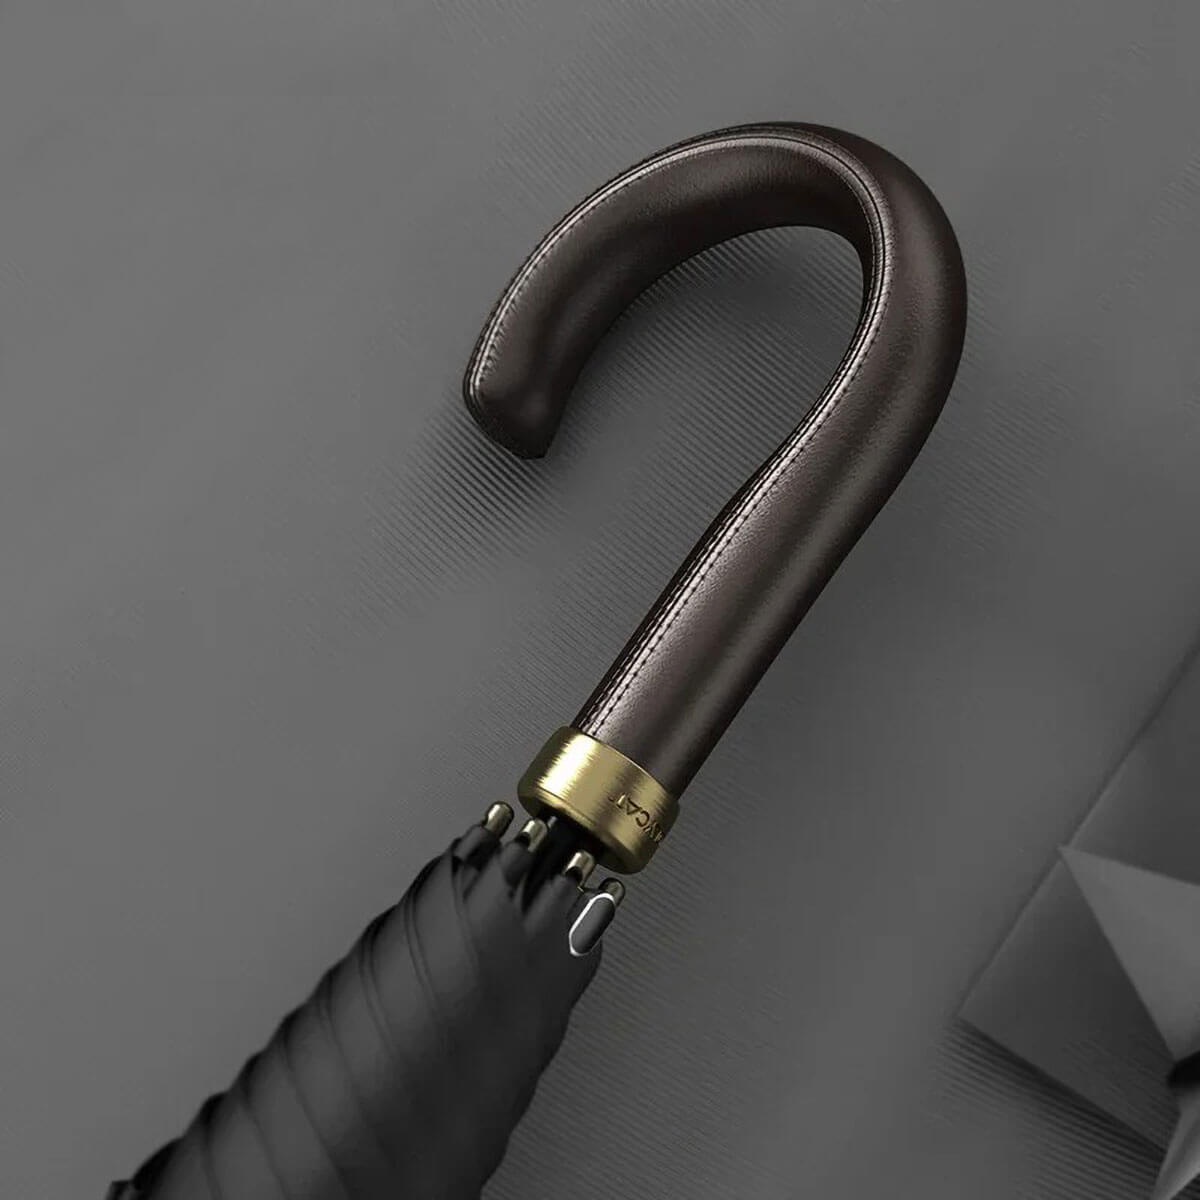 Luxurious long umbrella with a genuine leather handle